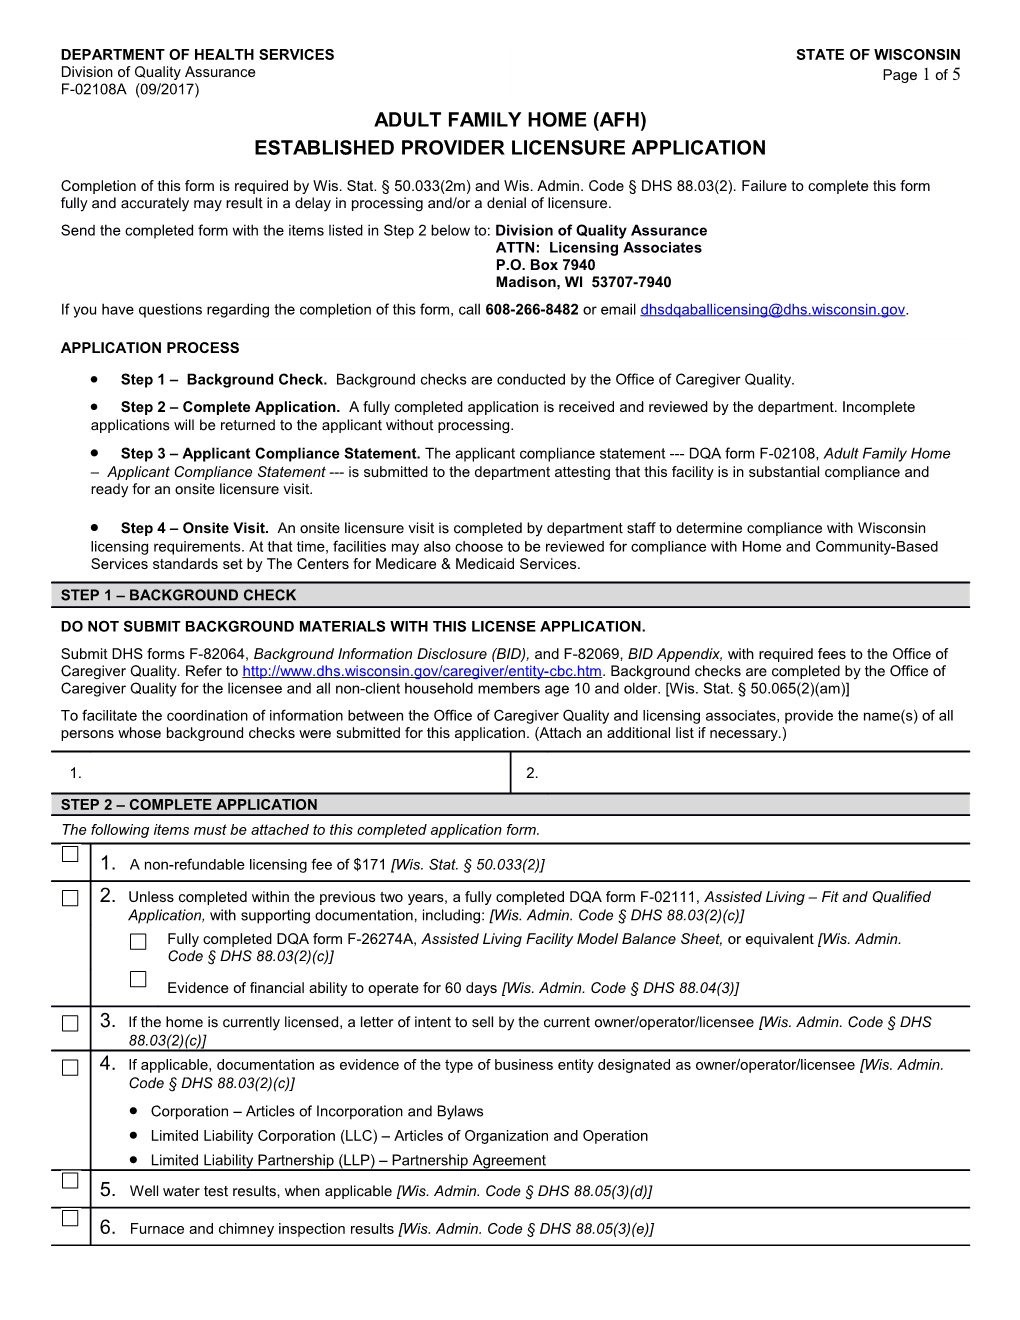 Adult Family Home - Established Provider Licensure Application, F-02108A